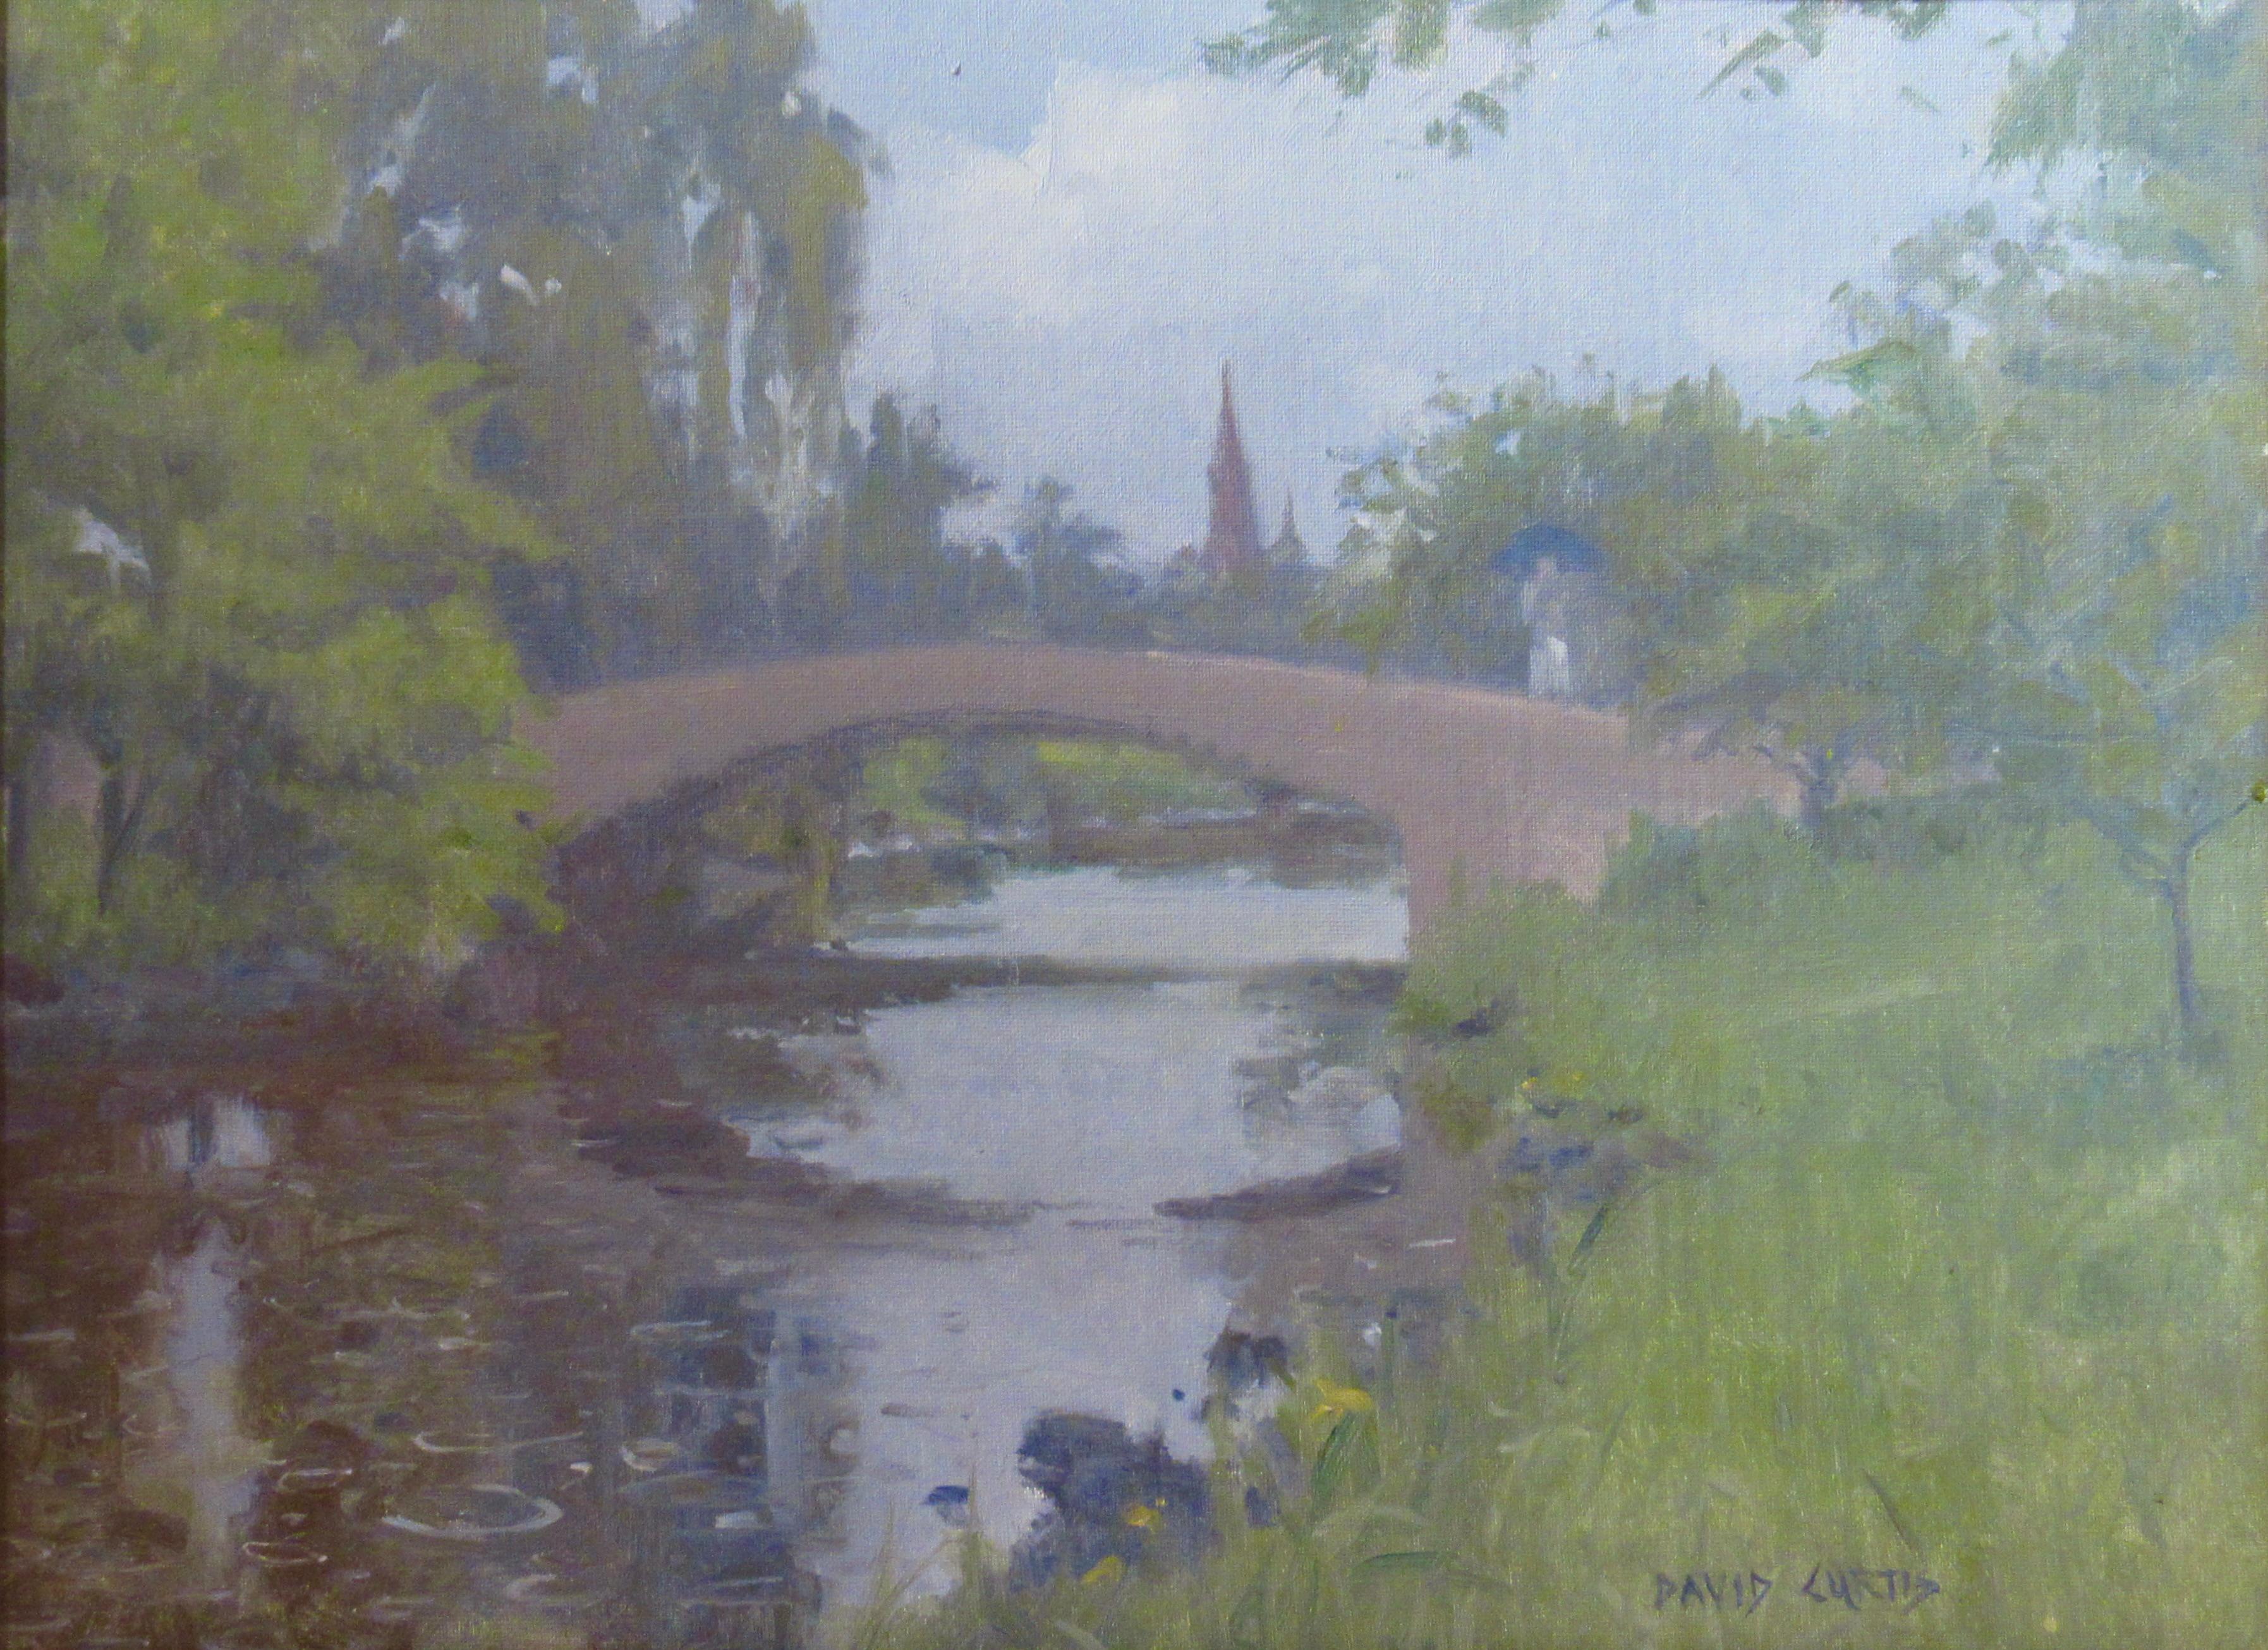 Landscape with Bridge - Painting by David P. Curtis